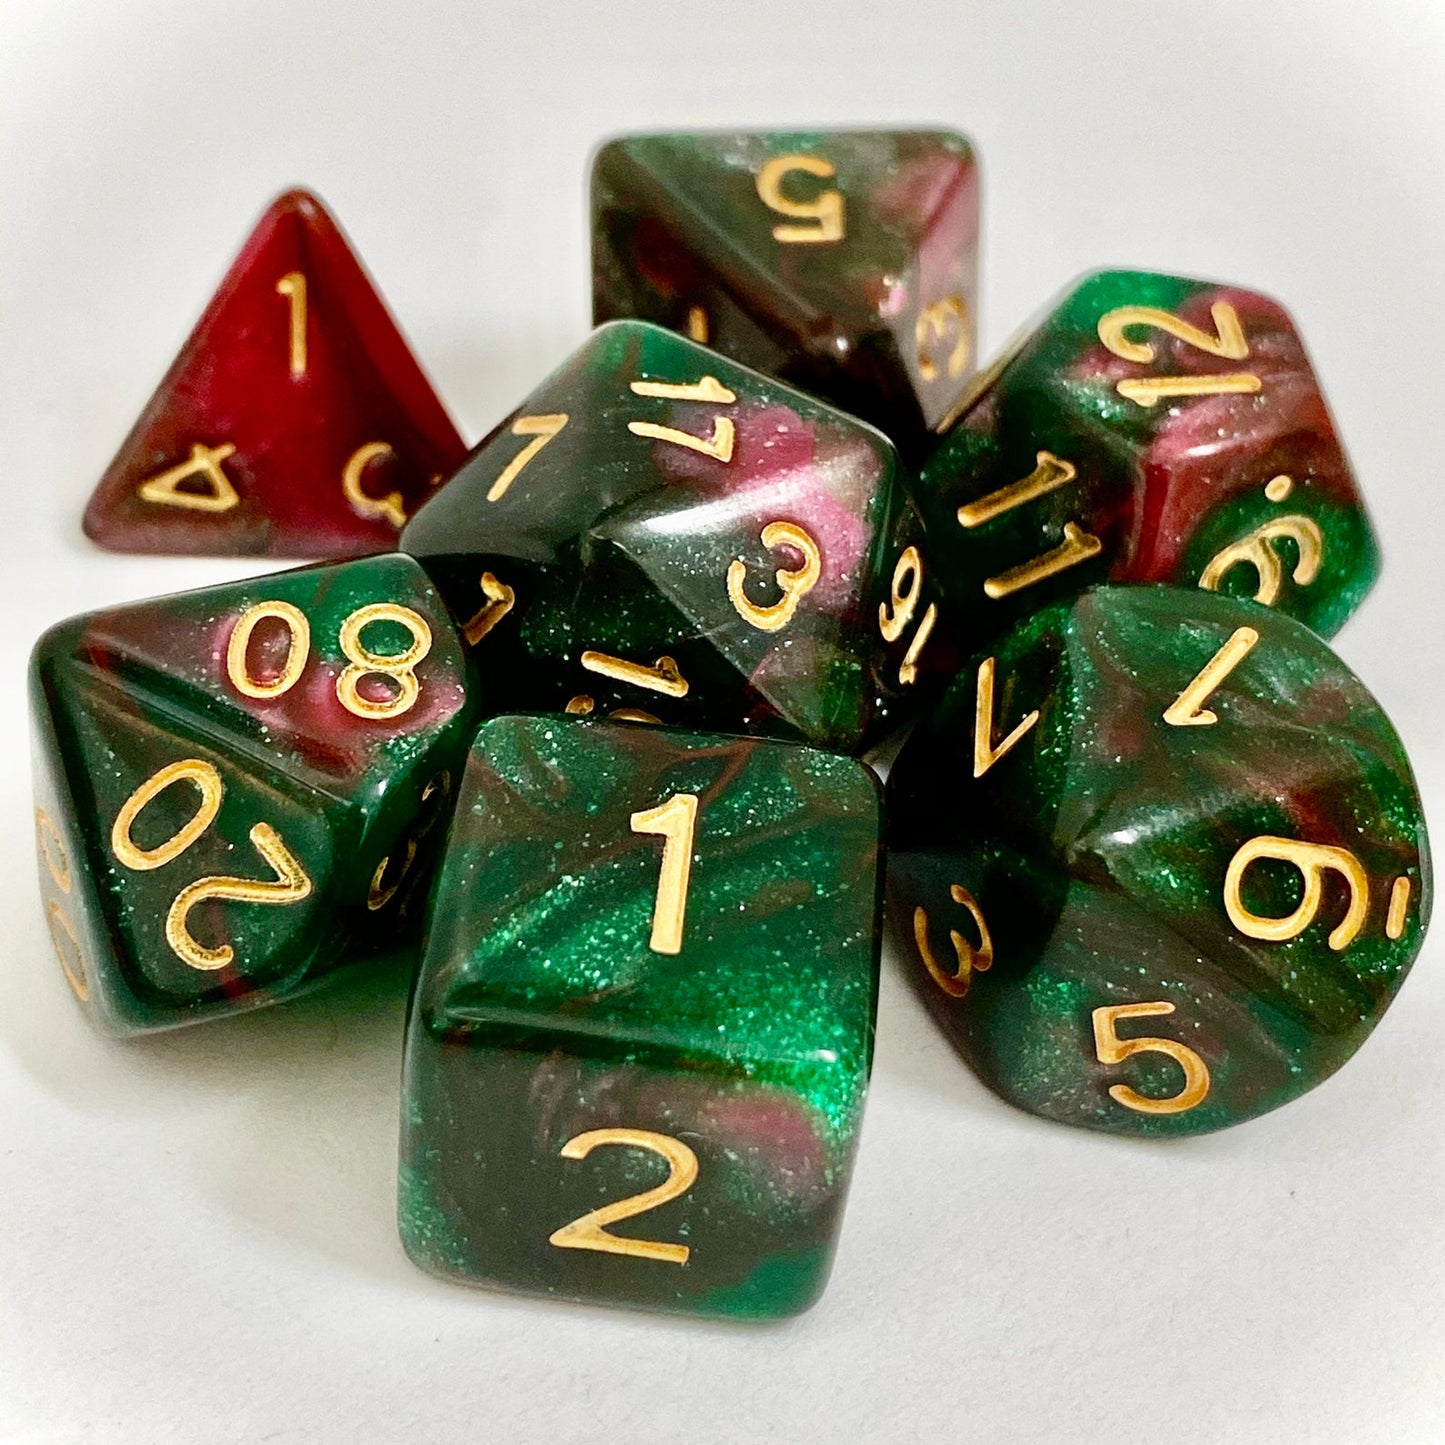 FREE Today: FAERIE FIRE DND Dice Set